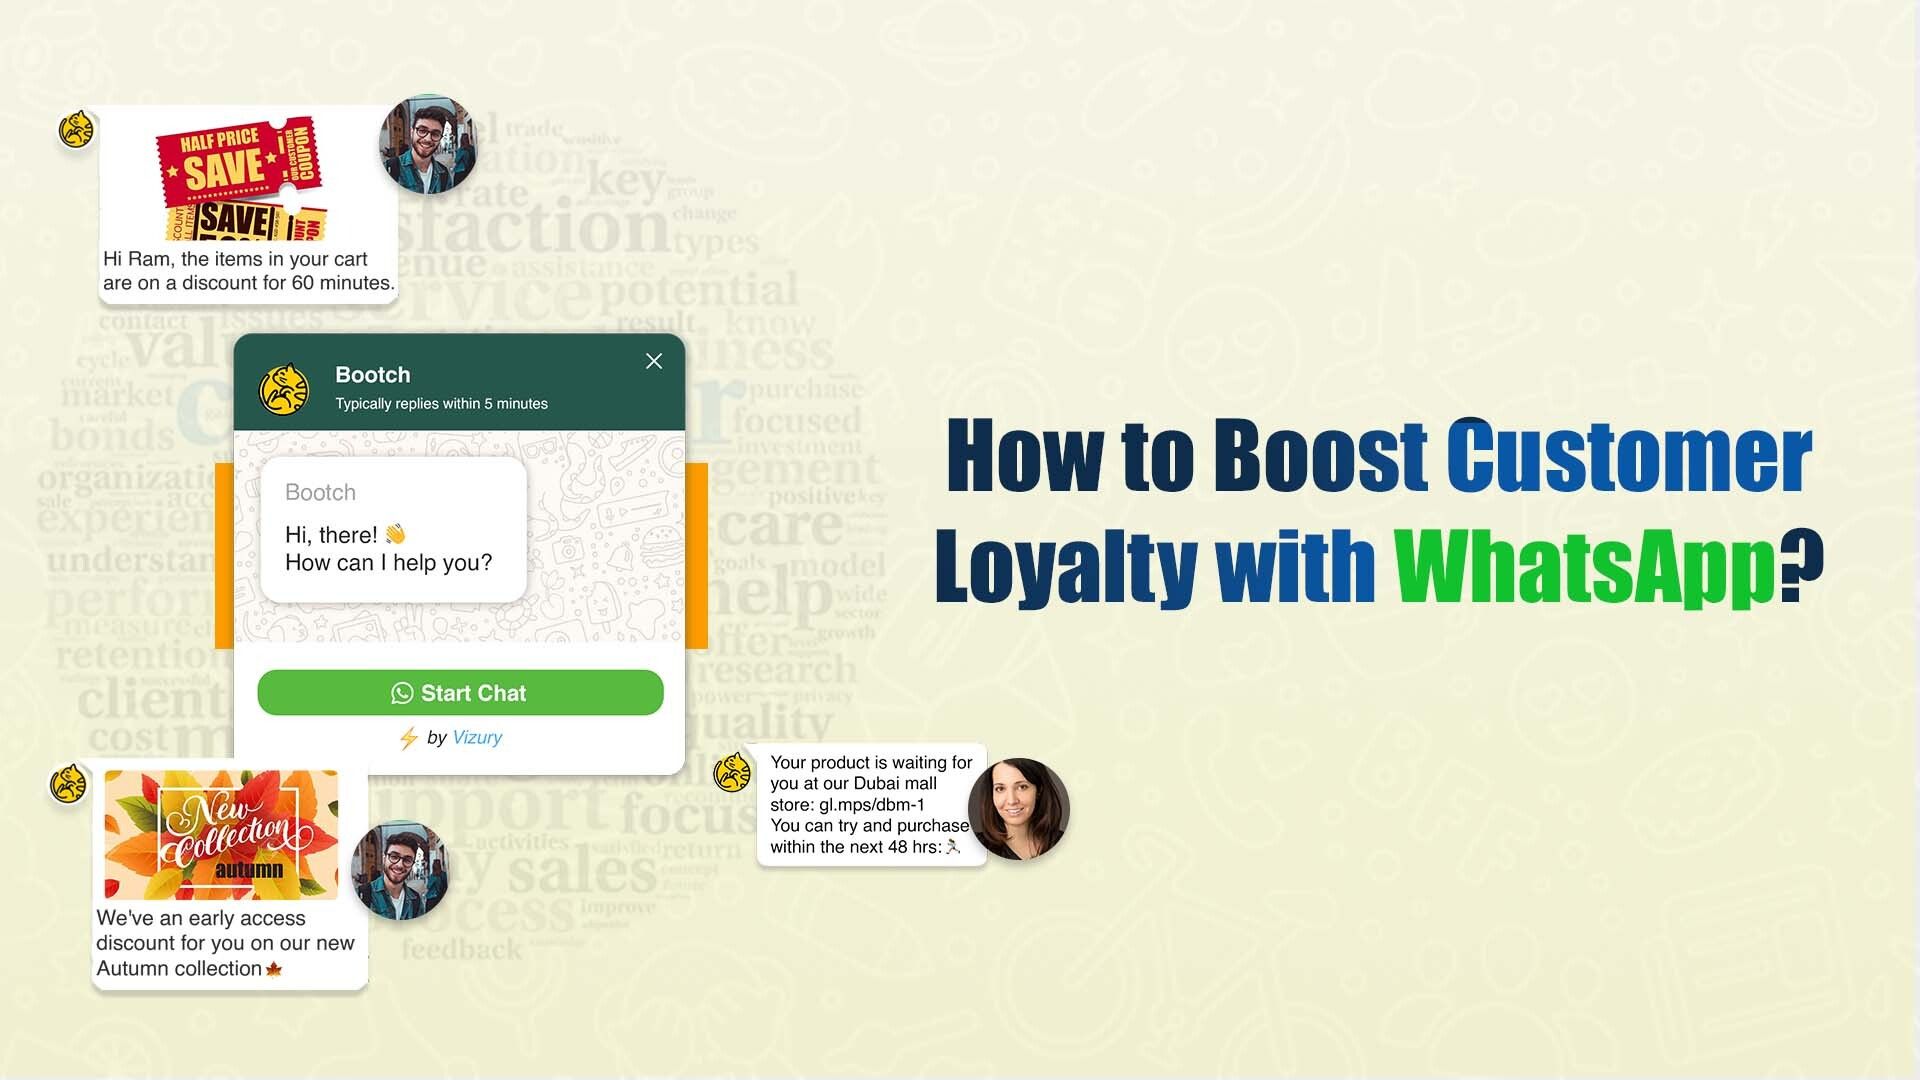 How to Boost Customer Loyalty with WhatsApp